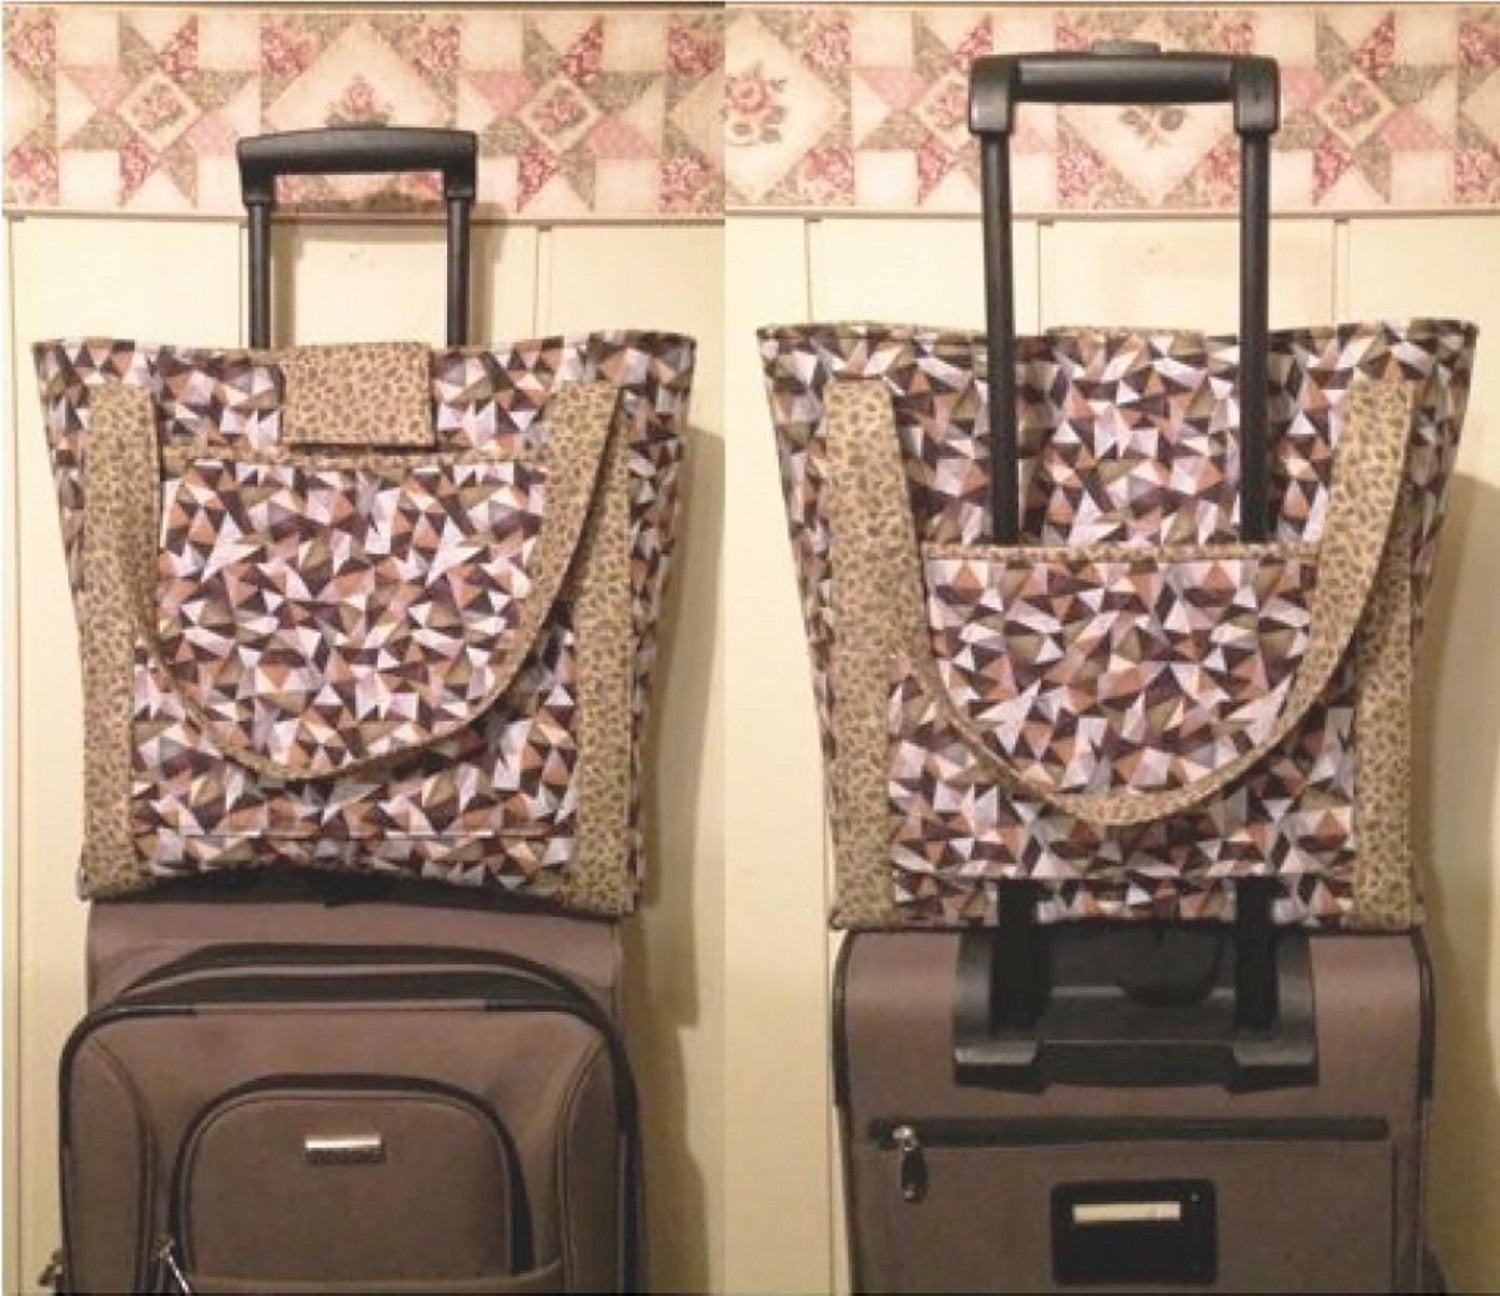 LUGGAGE RIDER CARRY-ON BAG PATTERN